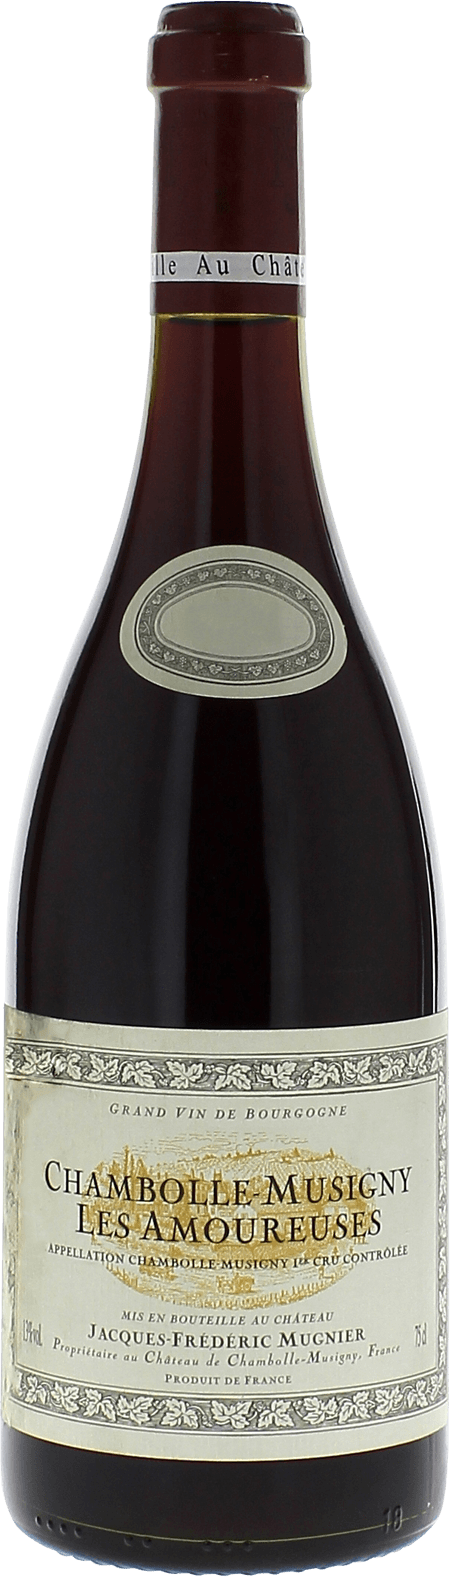 Chambolle musigny 1er cru les amoureuses 2014 Domaine MUGNIER Jacques Frederic, Bourgogne rouge